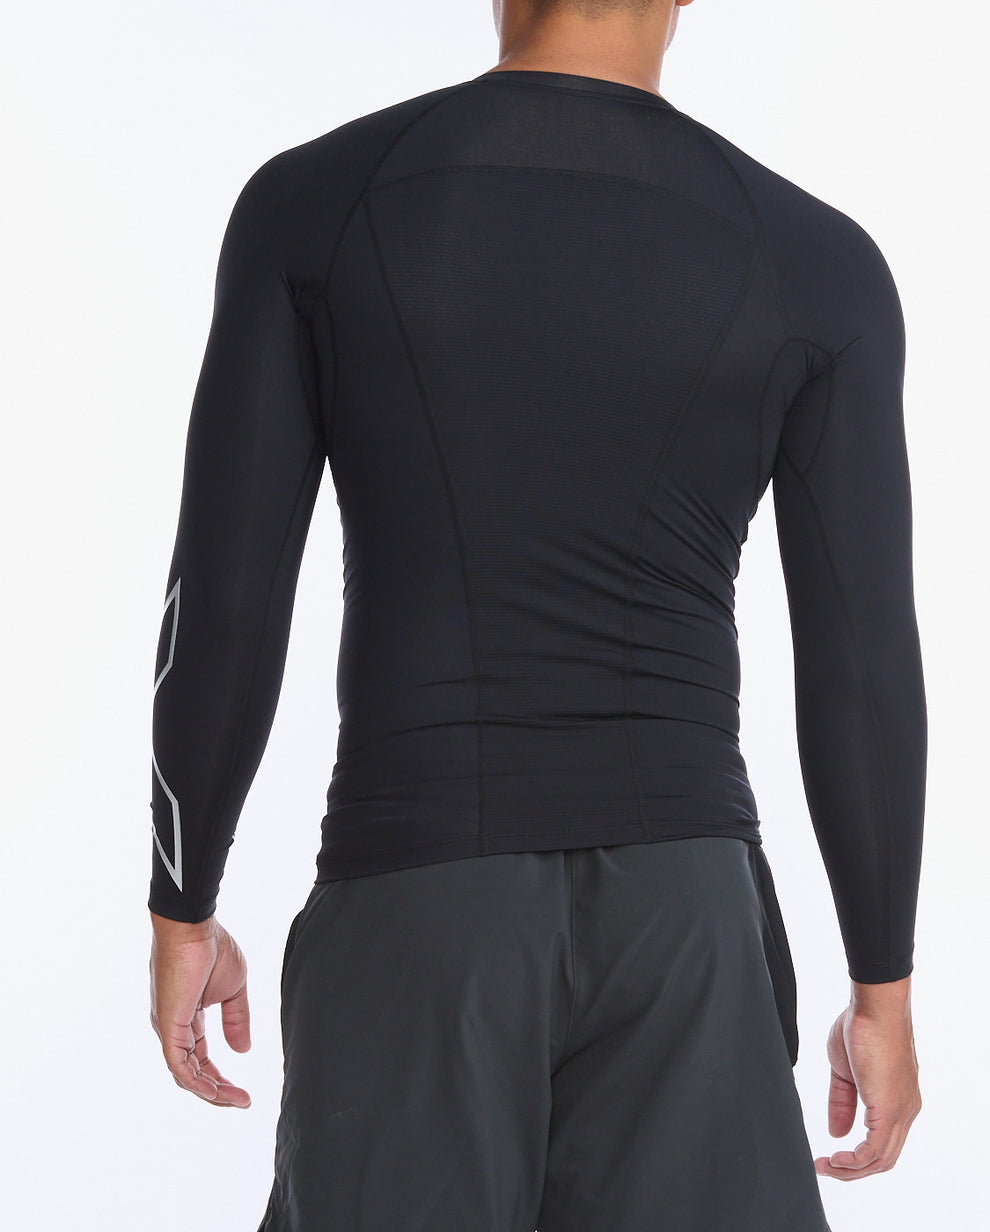 2XU Core Compression Full Sleeve Men's Cycling Jersey (Black Silver)